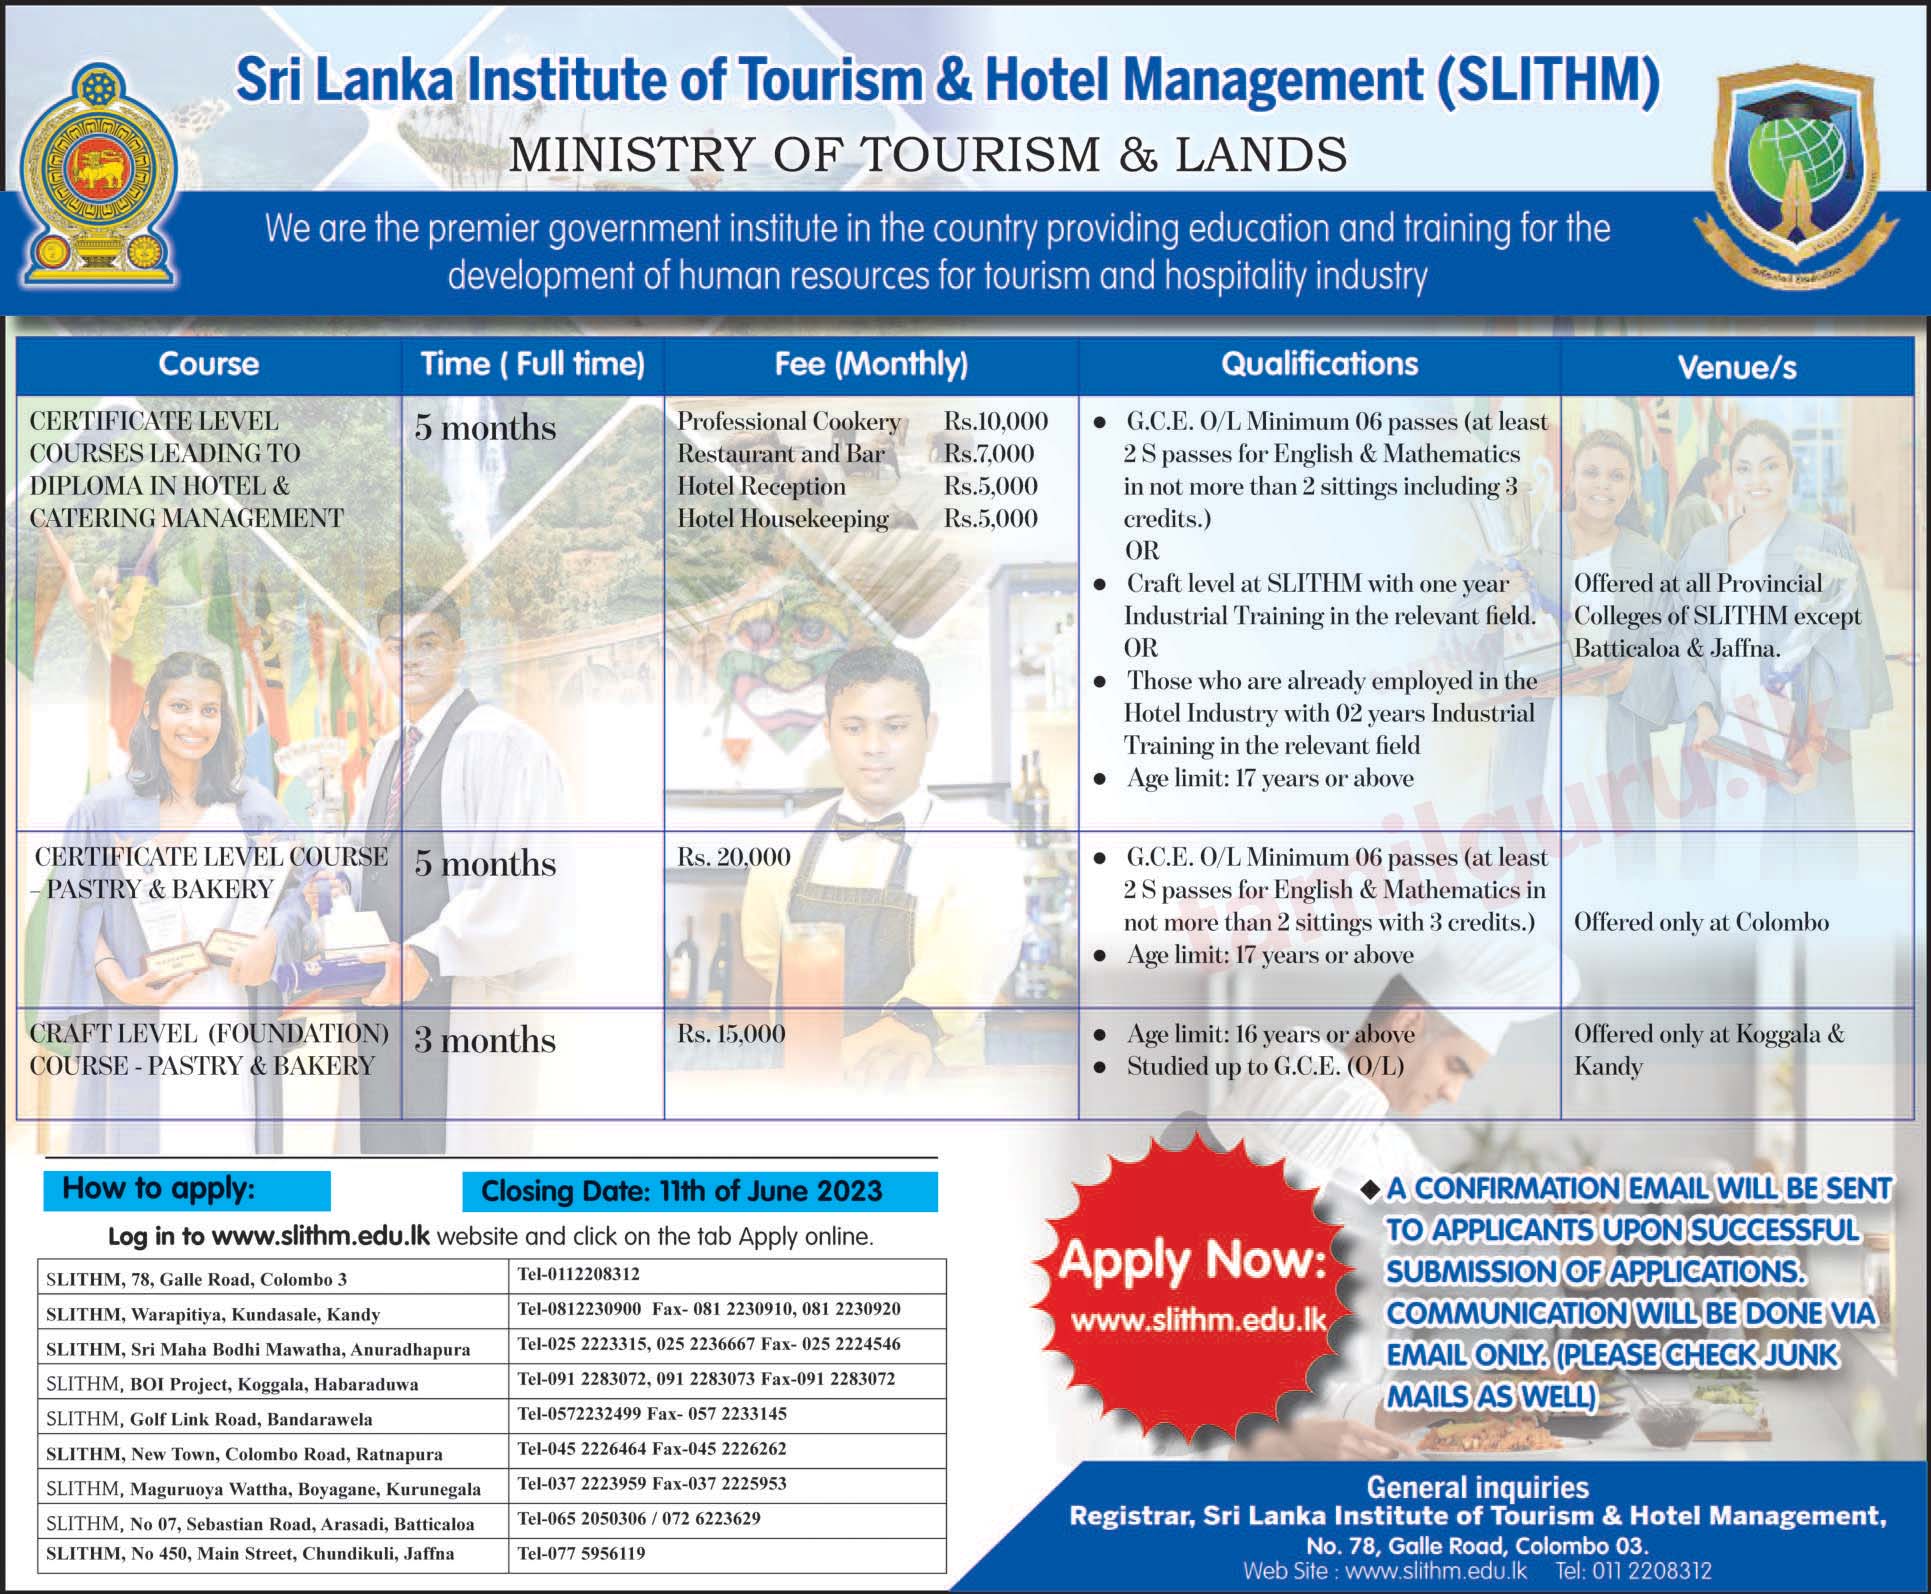 Sri Lanka Institute of Tourism & Hotel Management (SLITHM) - Application For Courses (2023 May)